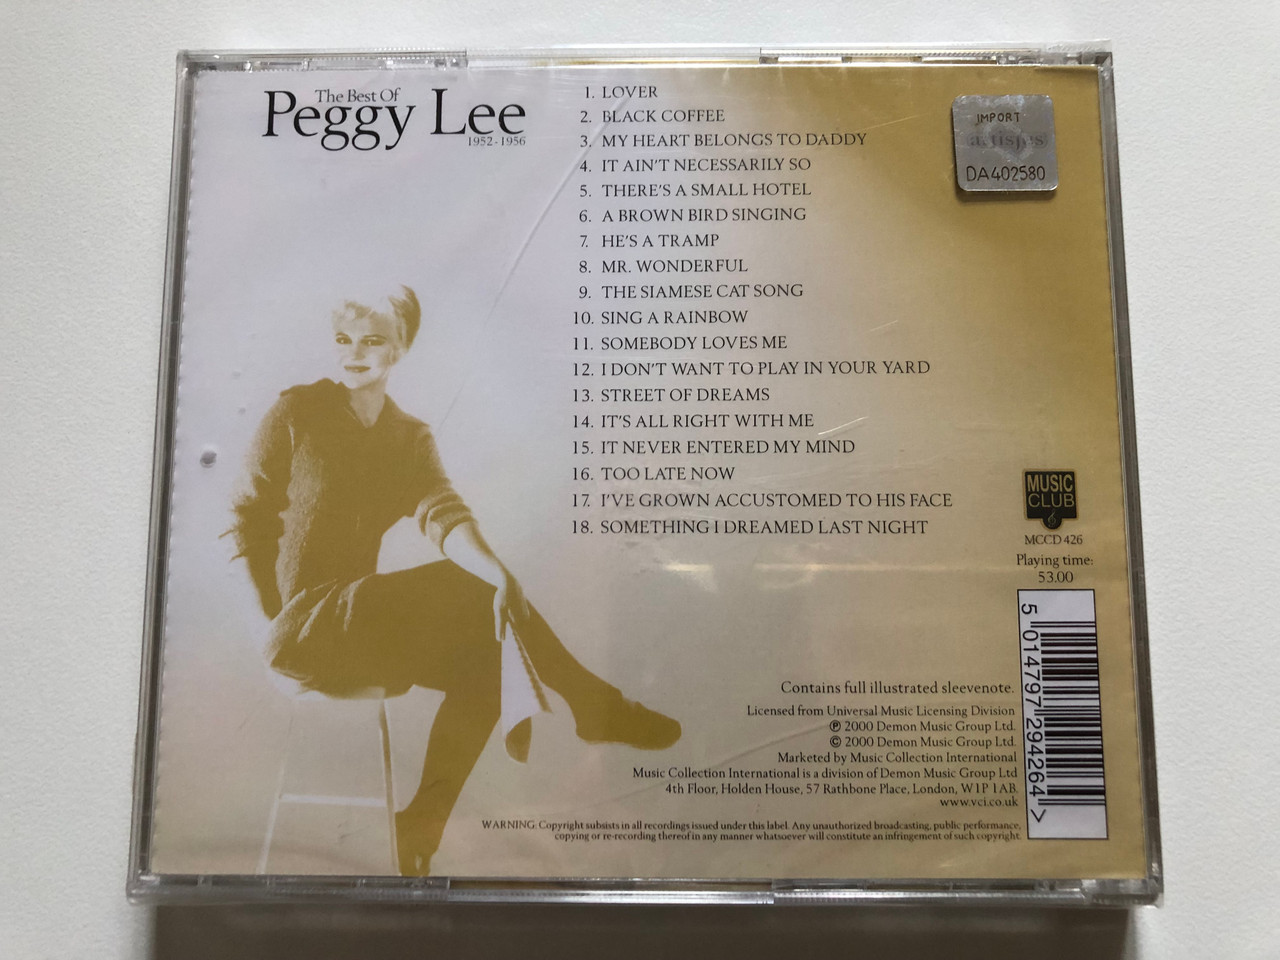 https://cdn10.bigcommerce.com/s-62bdpkt7pb/products/0/images/311244/The_Best_Of_Peggy_Lee_1952-1956_Music_Club_Audio_CD_2000_MCCD_426_2__37270.1699544186.1280.1280.JPG?c=2